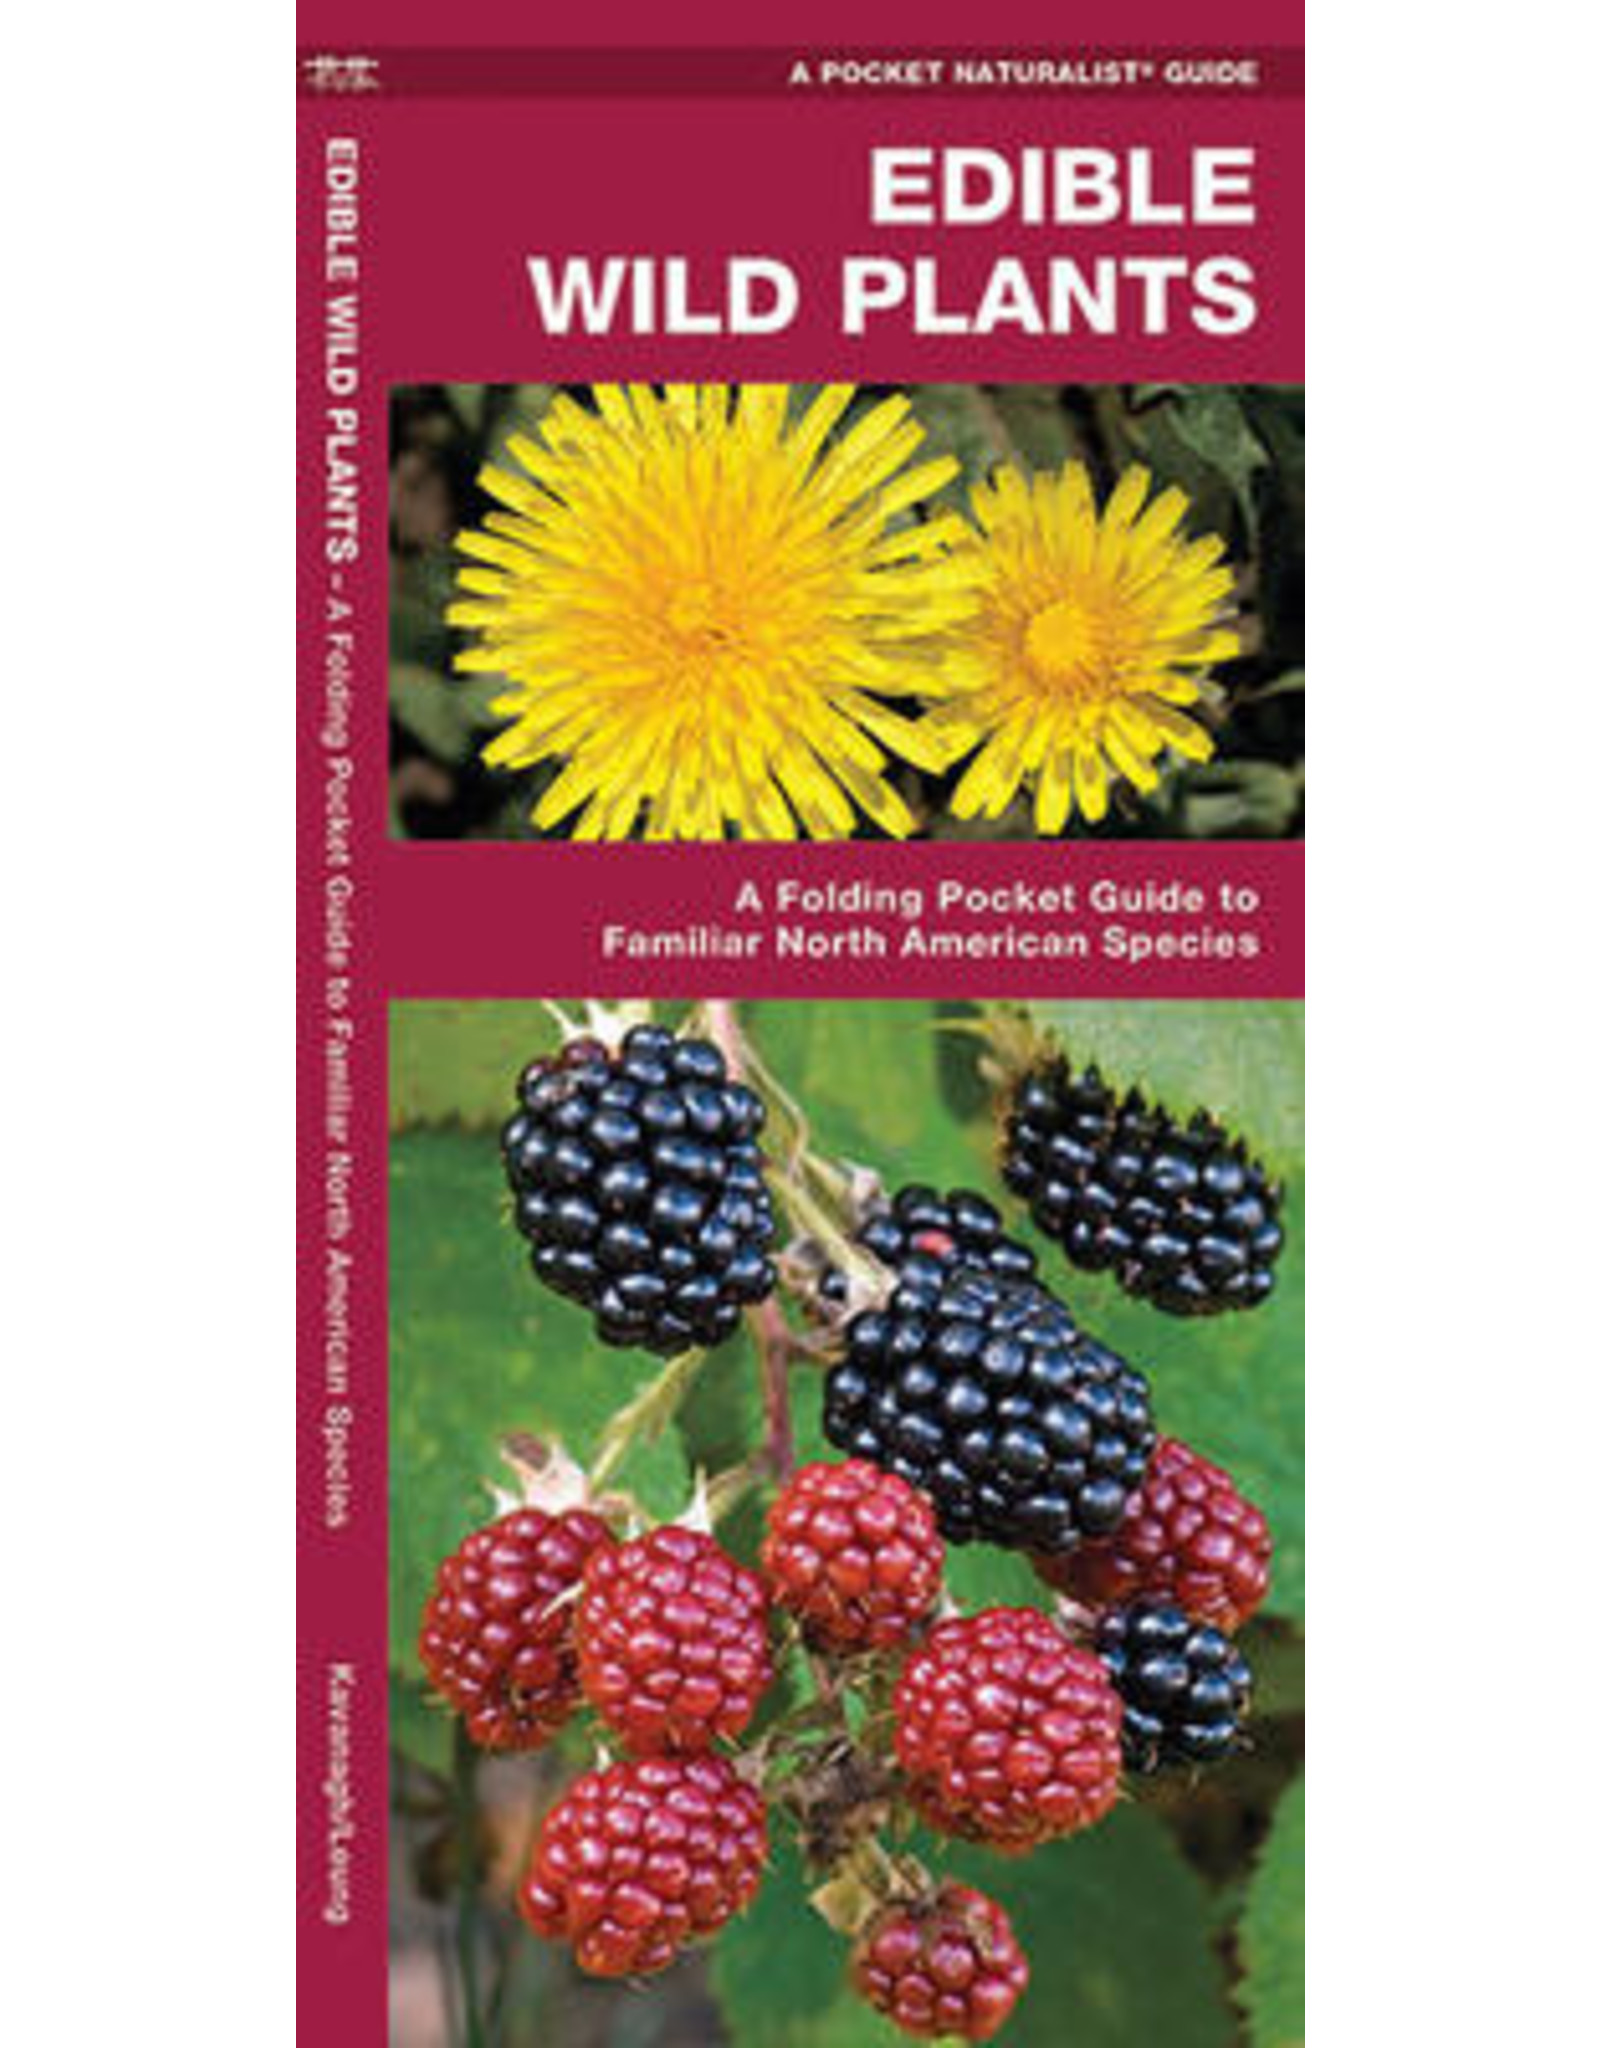 POCKET BOOK WP FORAGING FOR WILD EDIBLE FOODS